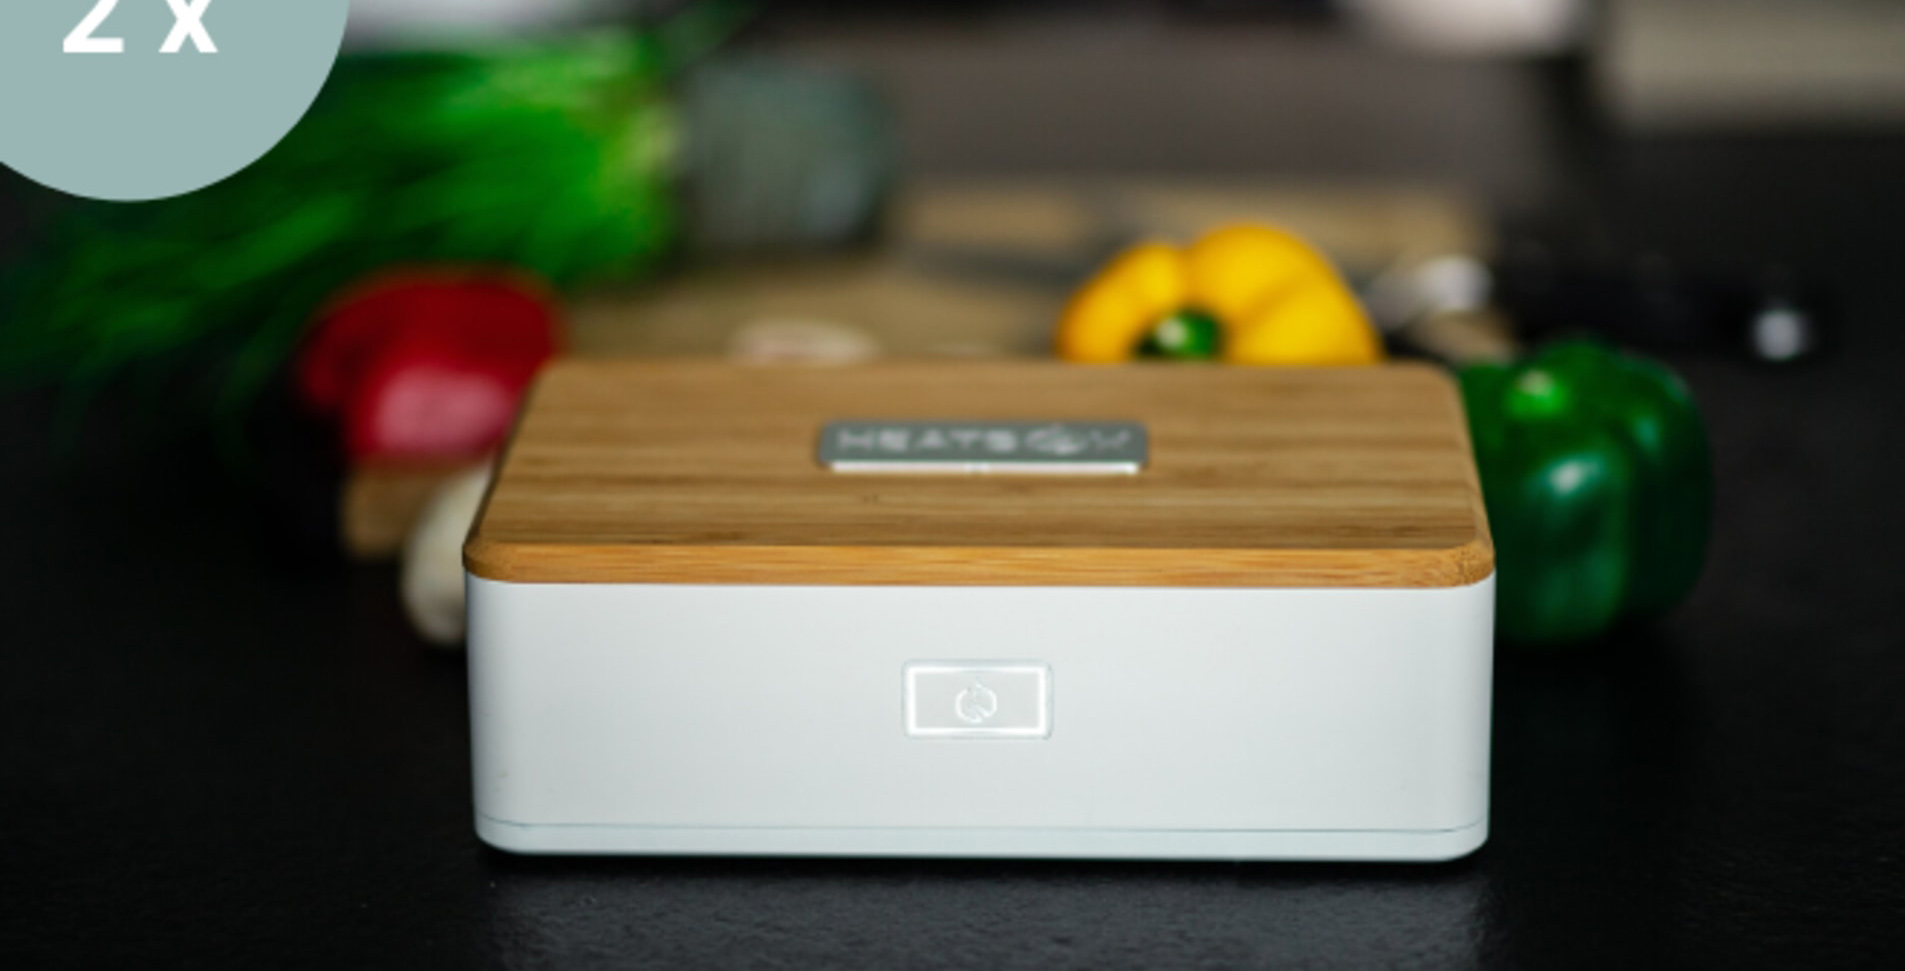 The Heatbox is a self-heating lunchbox that uses steam